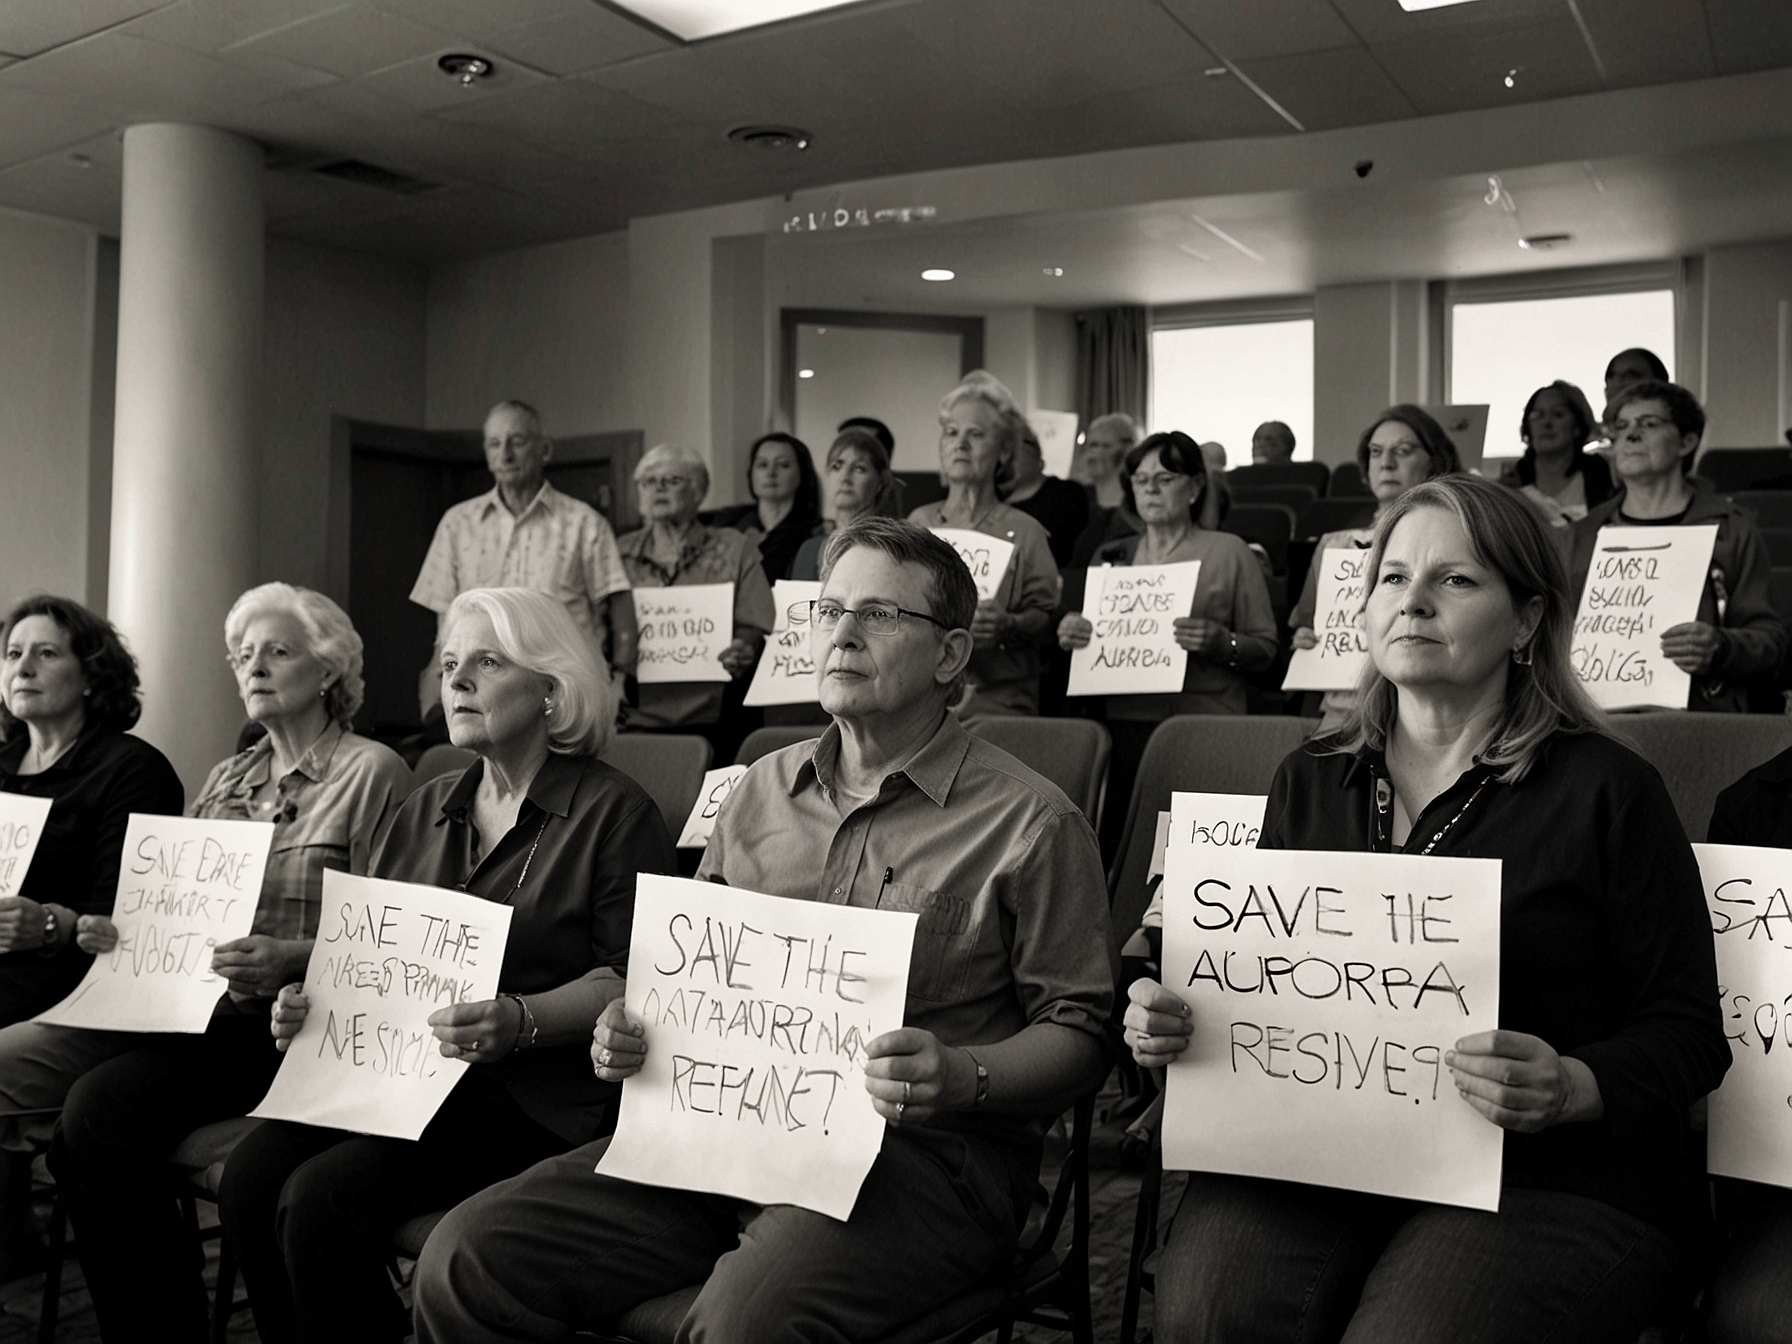 Residents of Aurora display signs reading “Save the Aurora Reservoir” during a community meeting, highlighting their concerns about the potential environmental and health impacts of fracking.